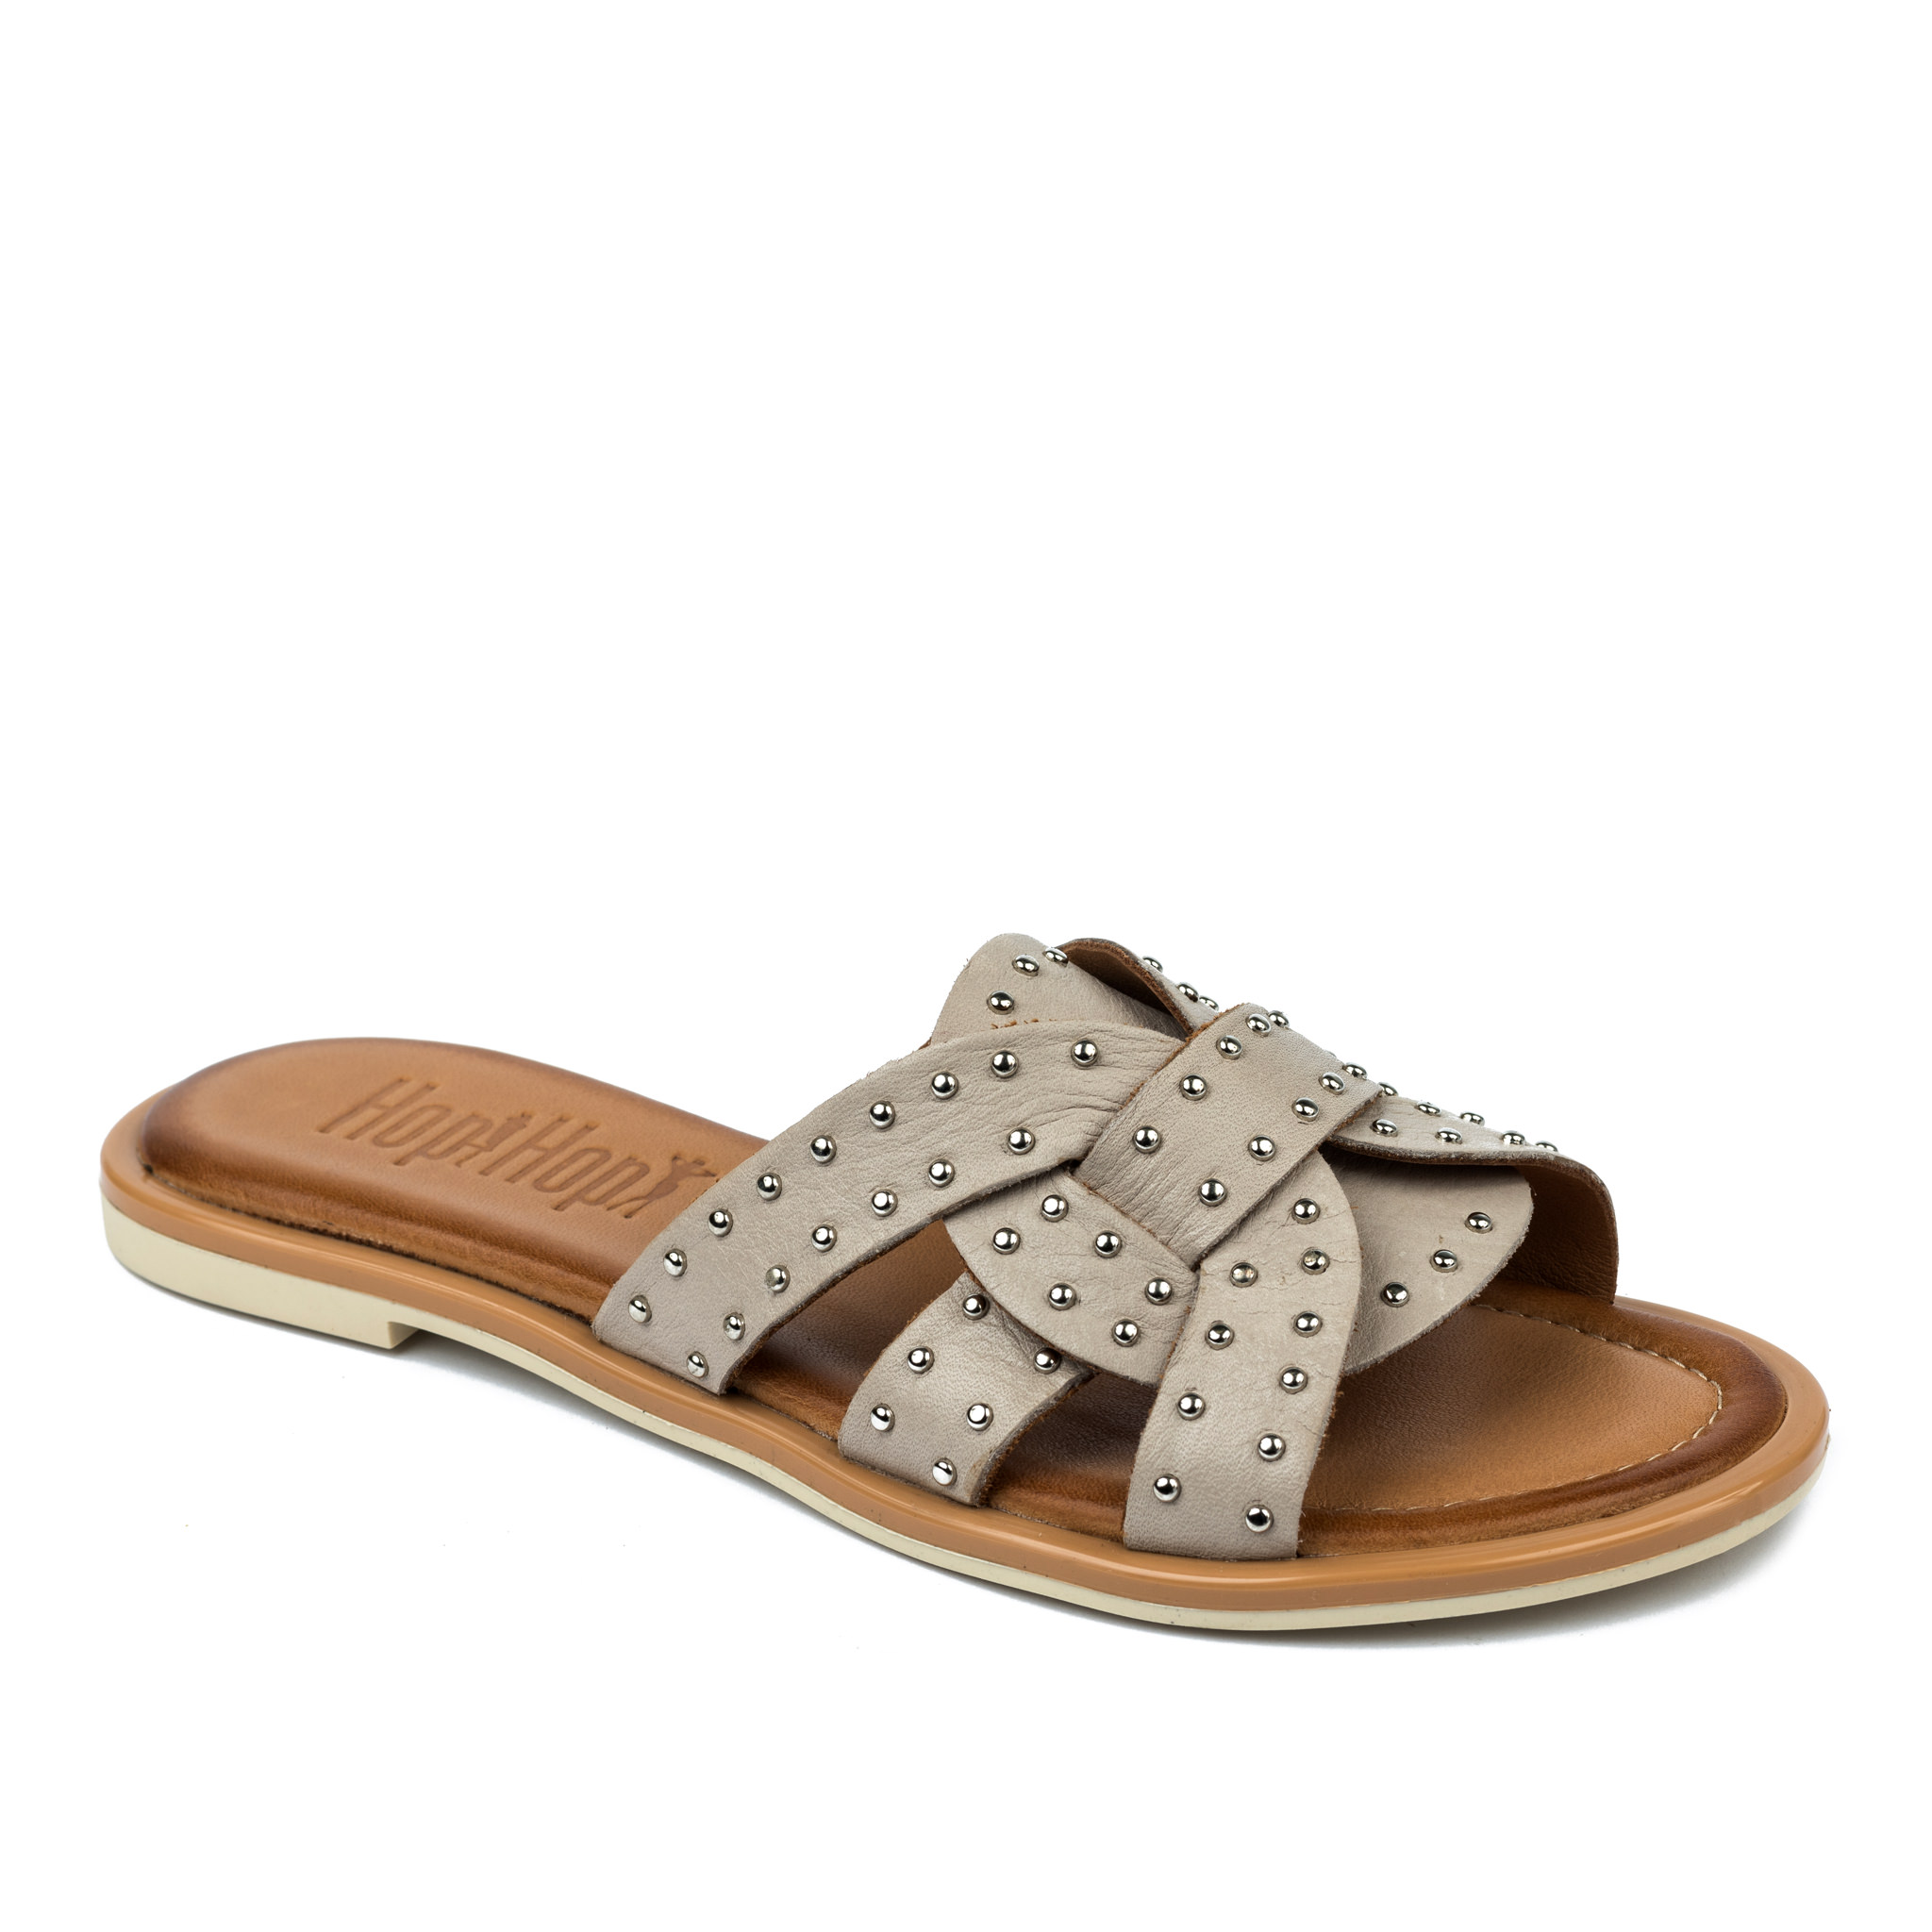 Leather slippers CARRIE - BEIGE